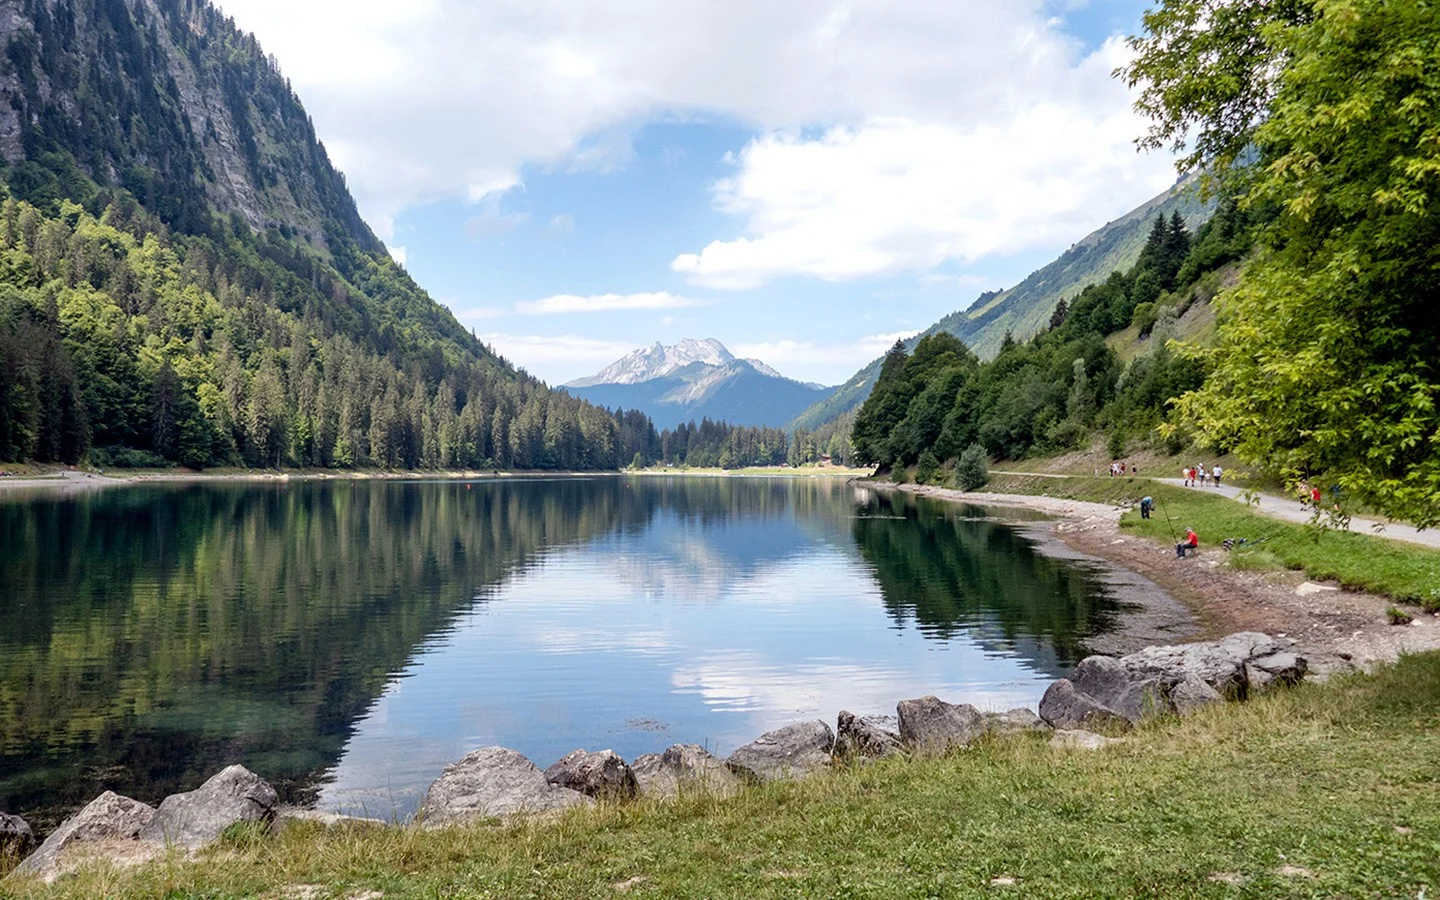 Lake Montriond/Lac de Montriond near Morzine in the French Alps